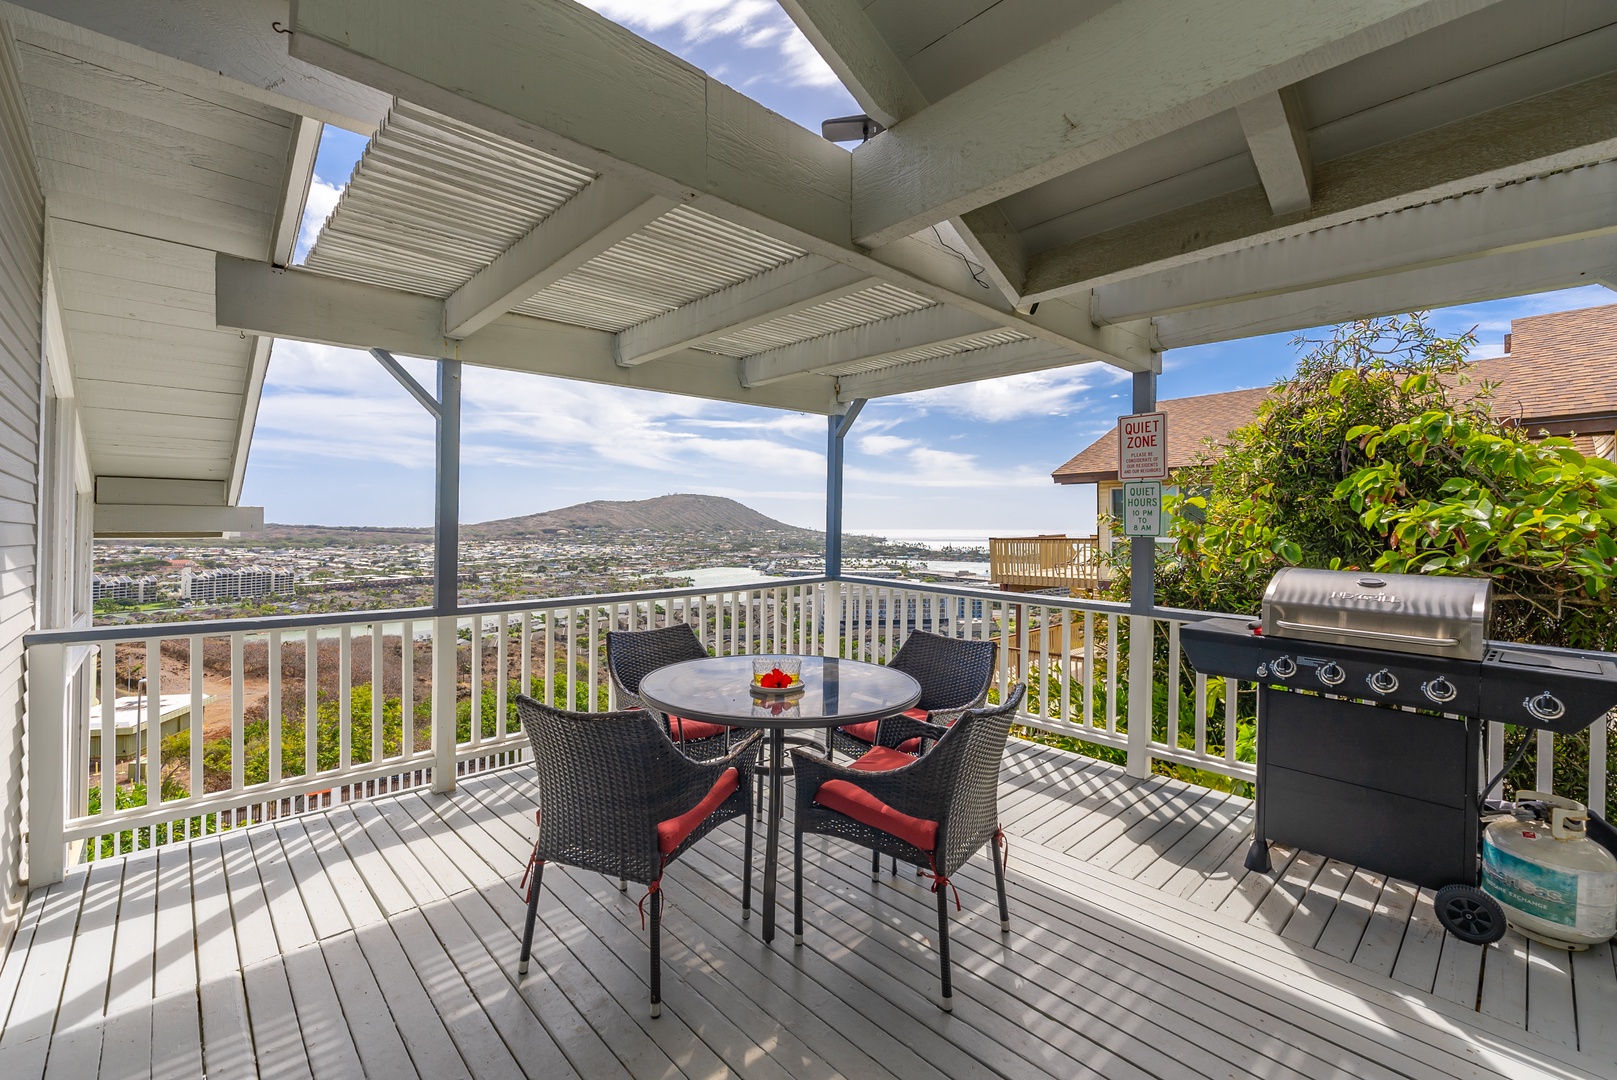 Upper balcony with outdoor seating and grill and more views